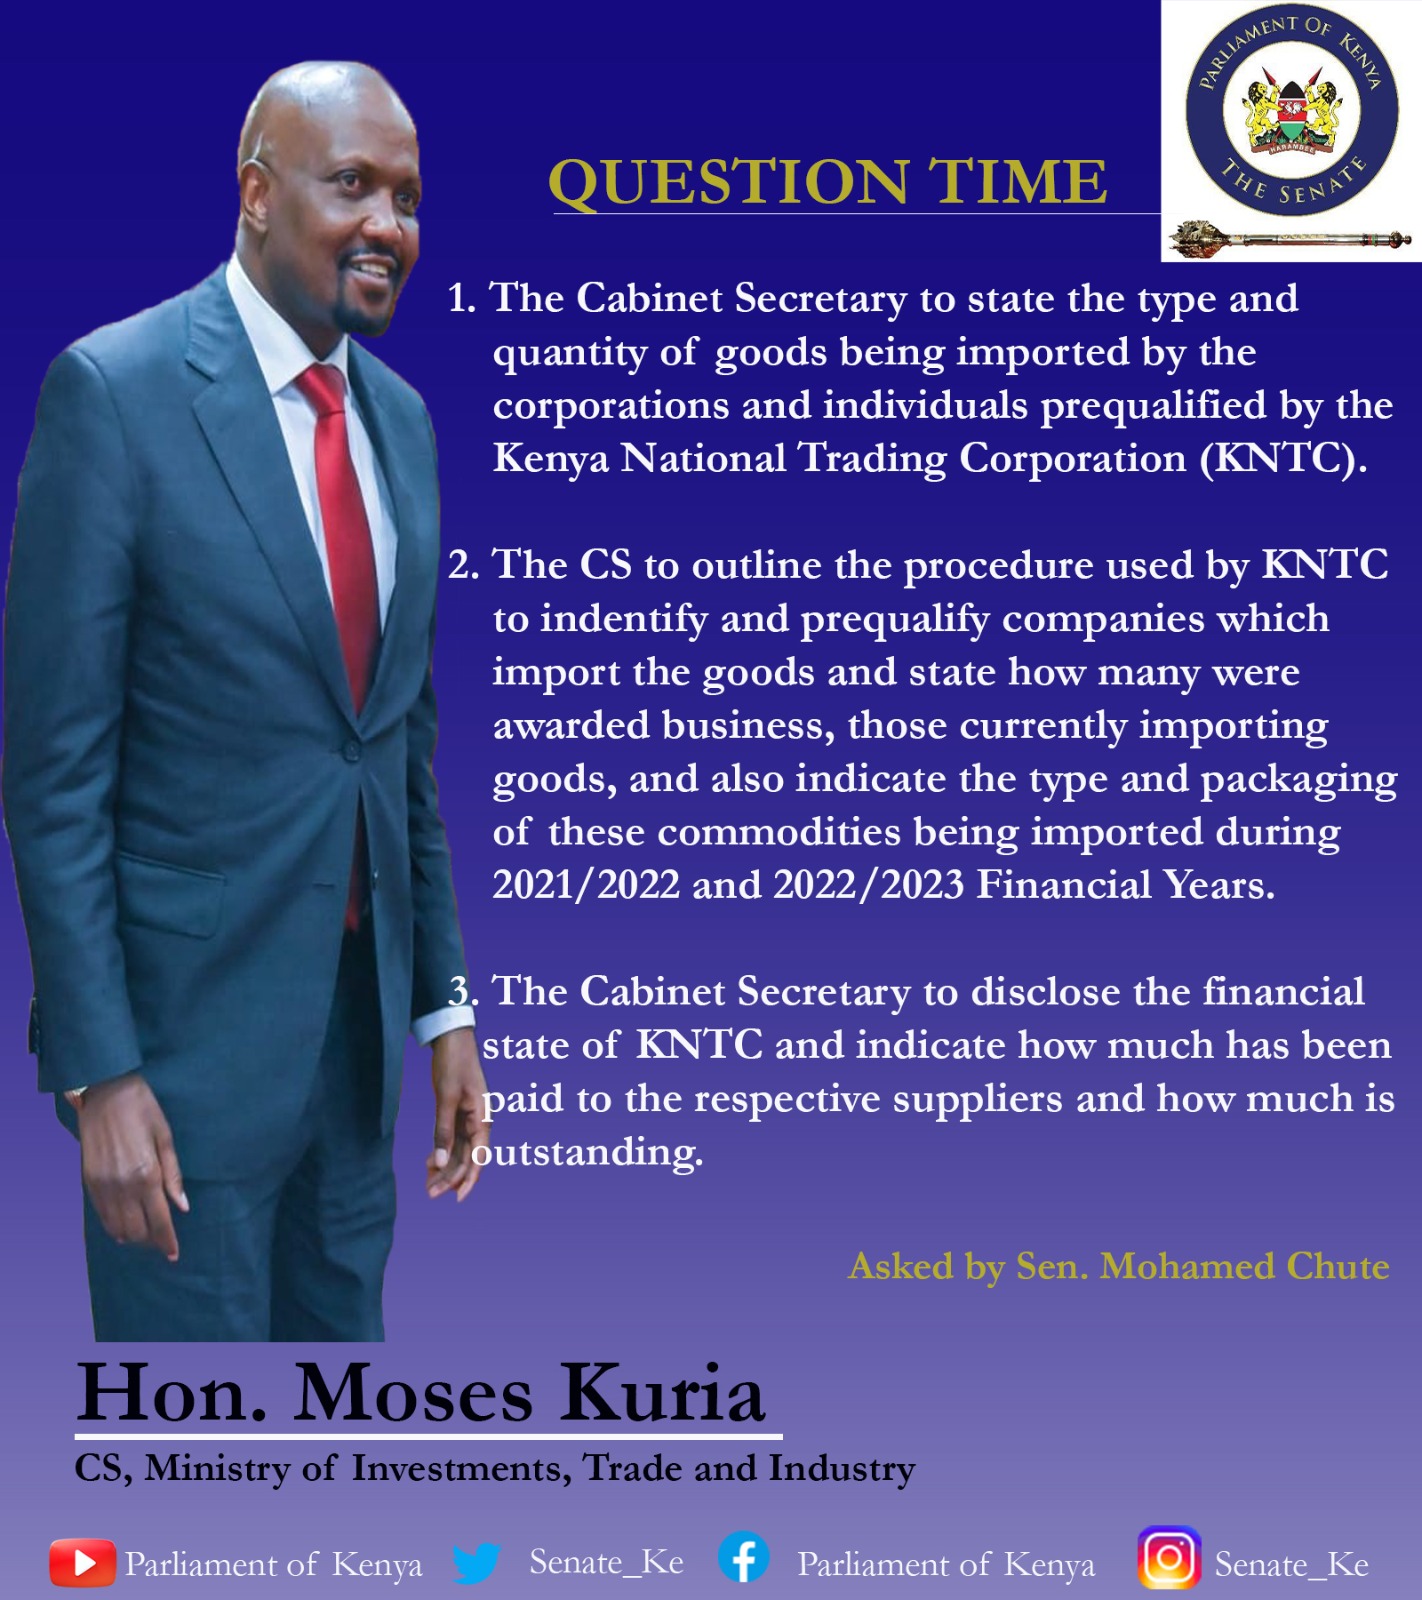 Cabinet Secretary for Investments, Trade and Industry will appear before the Senate tomorrow to answer questions in regards to his Ministry #QuestionTime